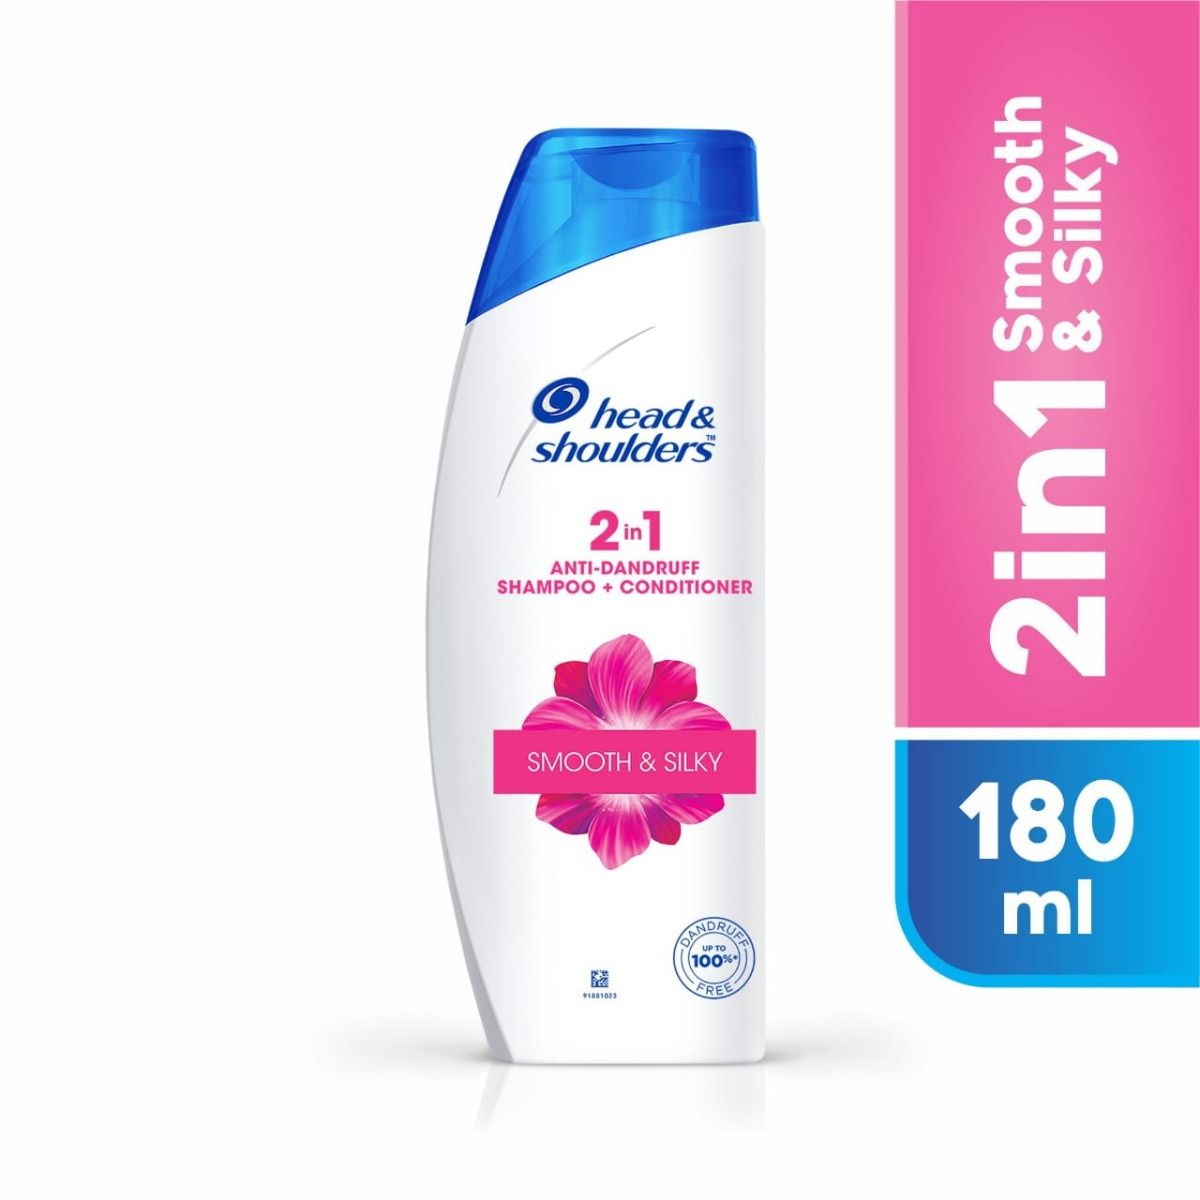 Head & Shoulders 2 in 1 Smooth & Silky Anti-Dandruff Shampoo + Conditioner, 180 ml, Pack of 1 